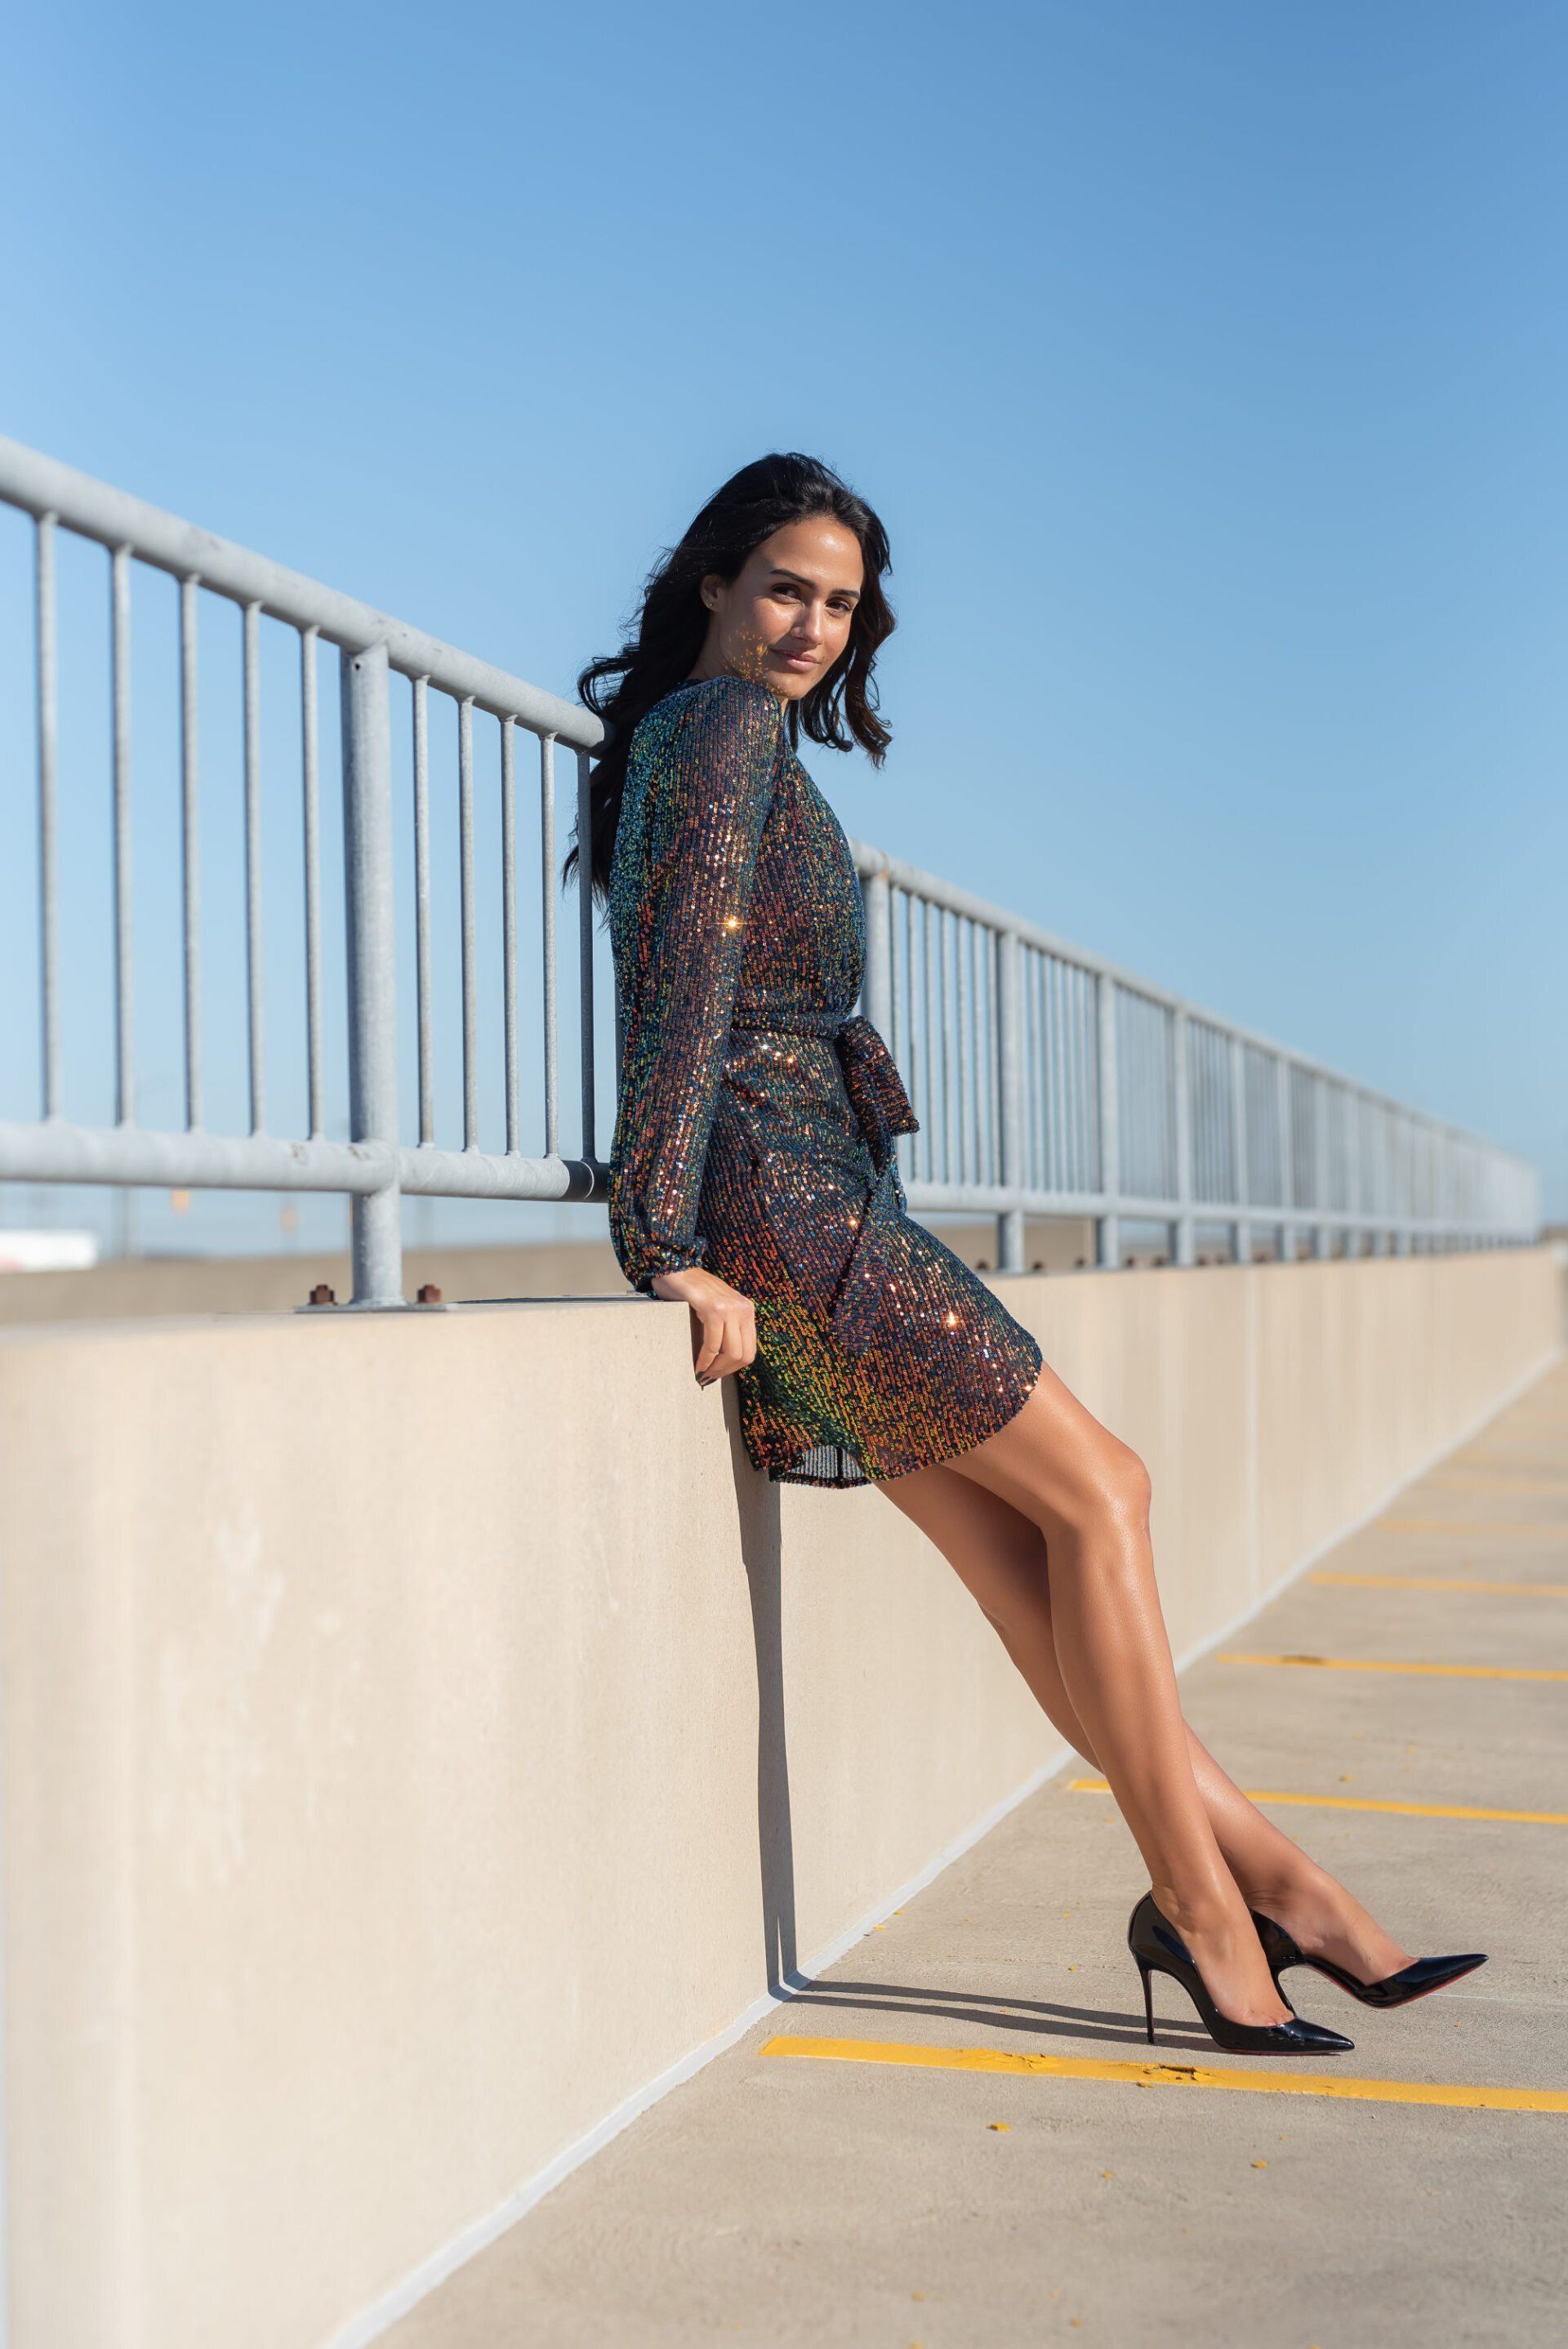 Social influencer Chantel in a sequin dress and black pumps posing by rails